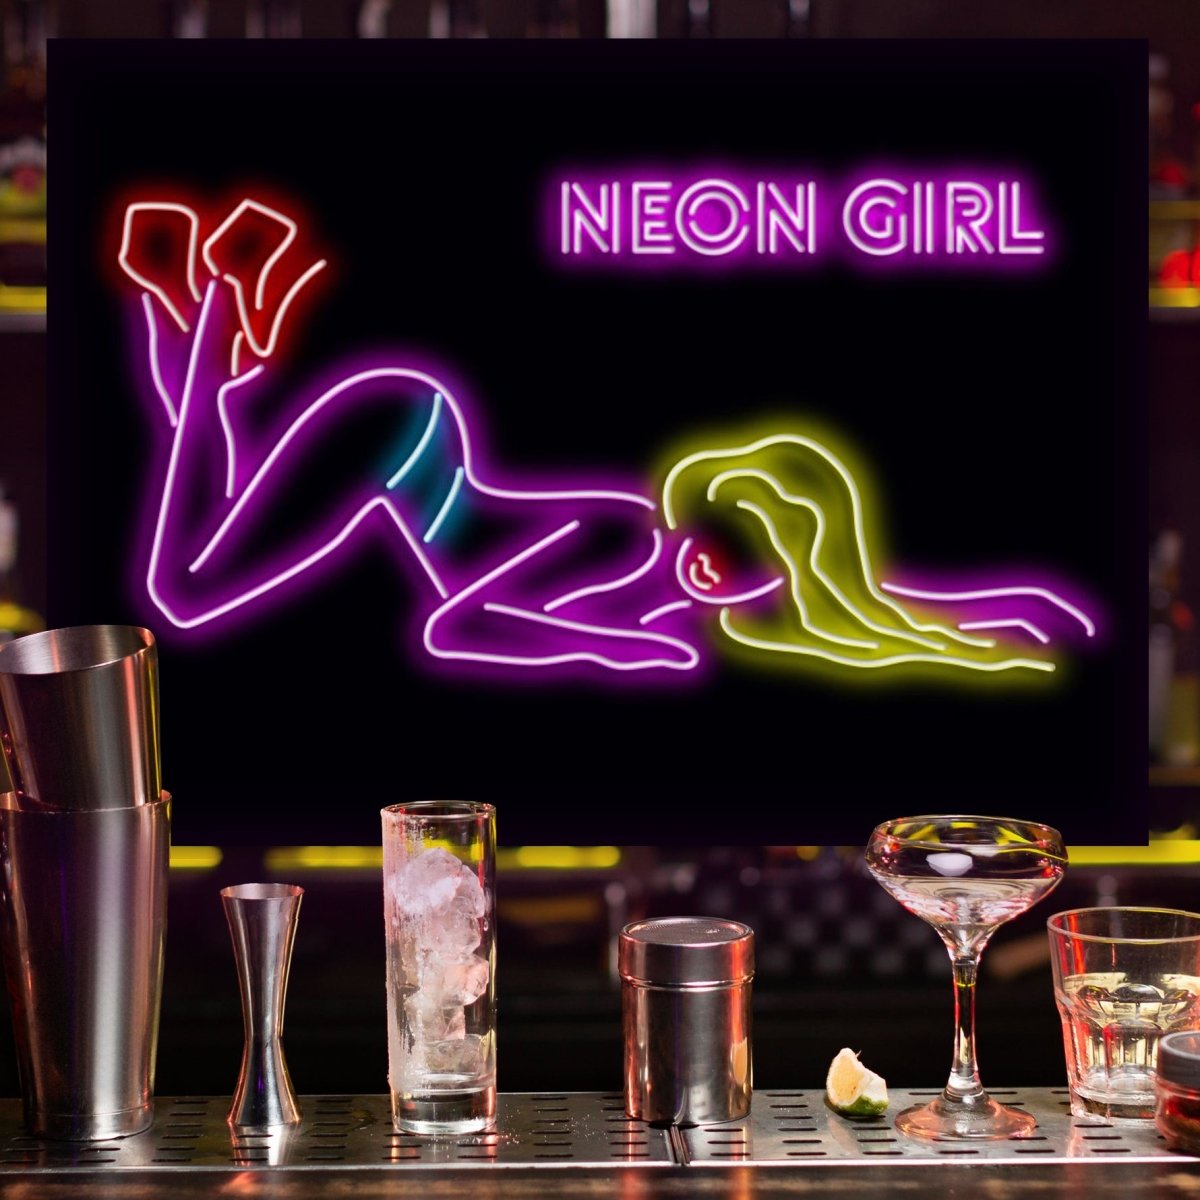 Personalised LED Neon Sign NEON GIRL - madaboutneon